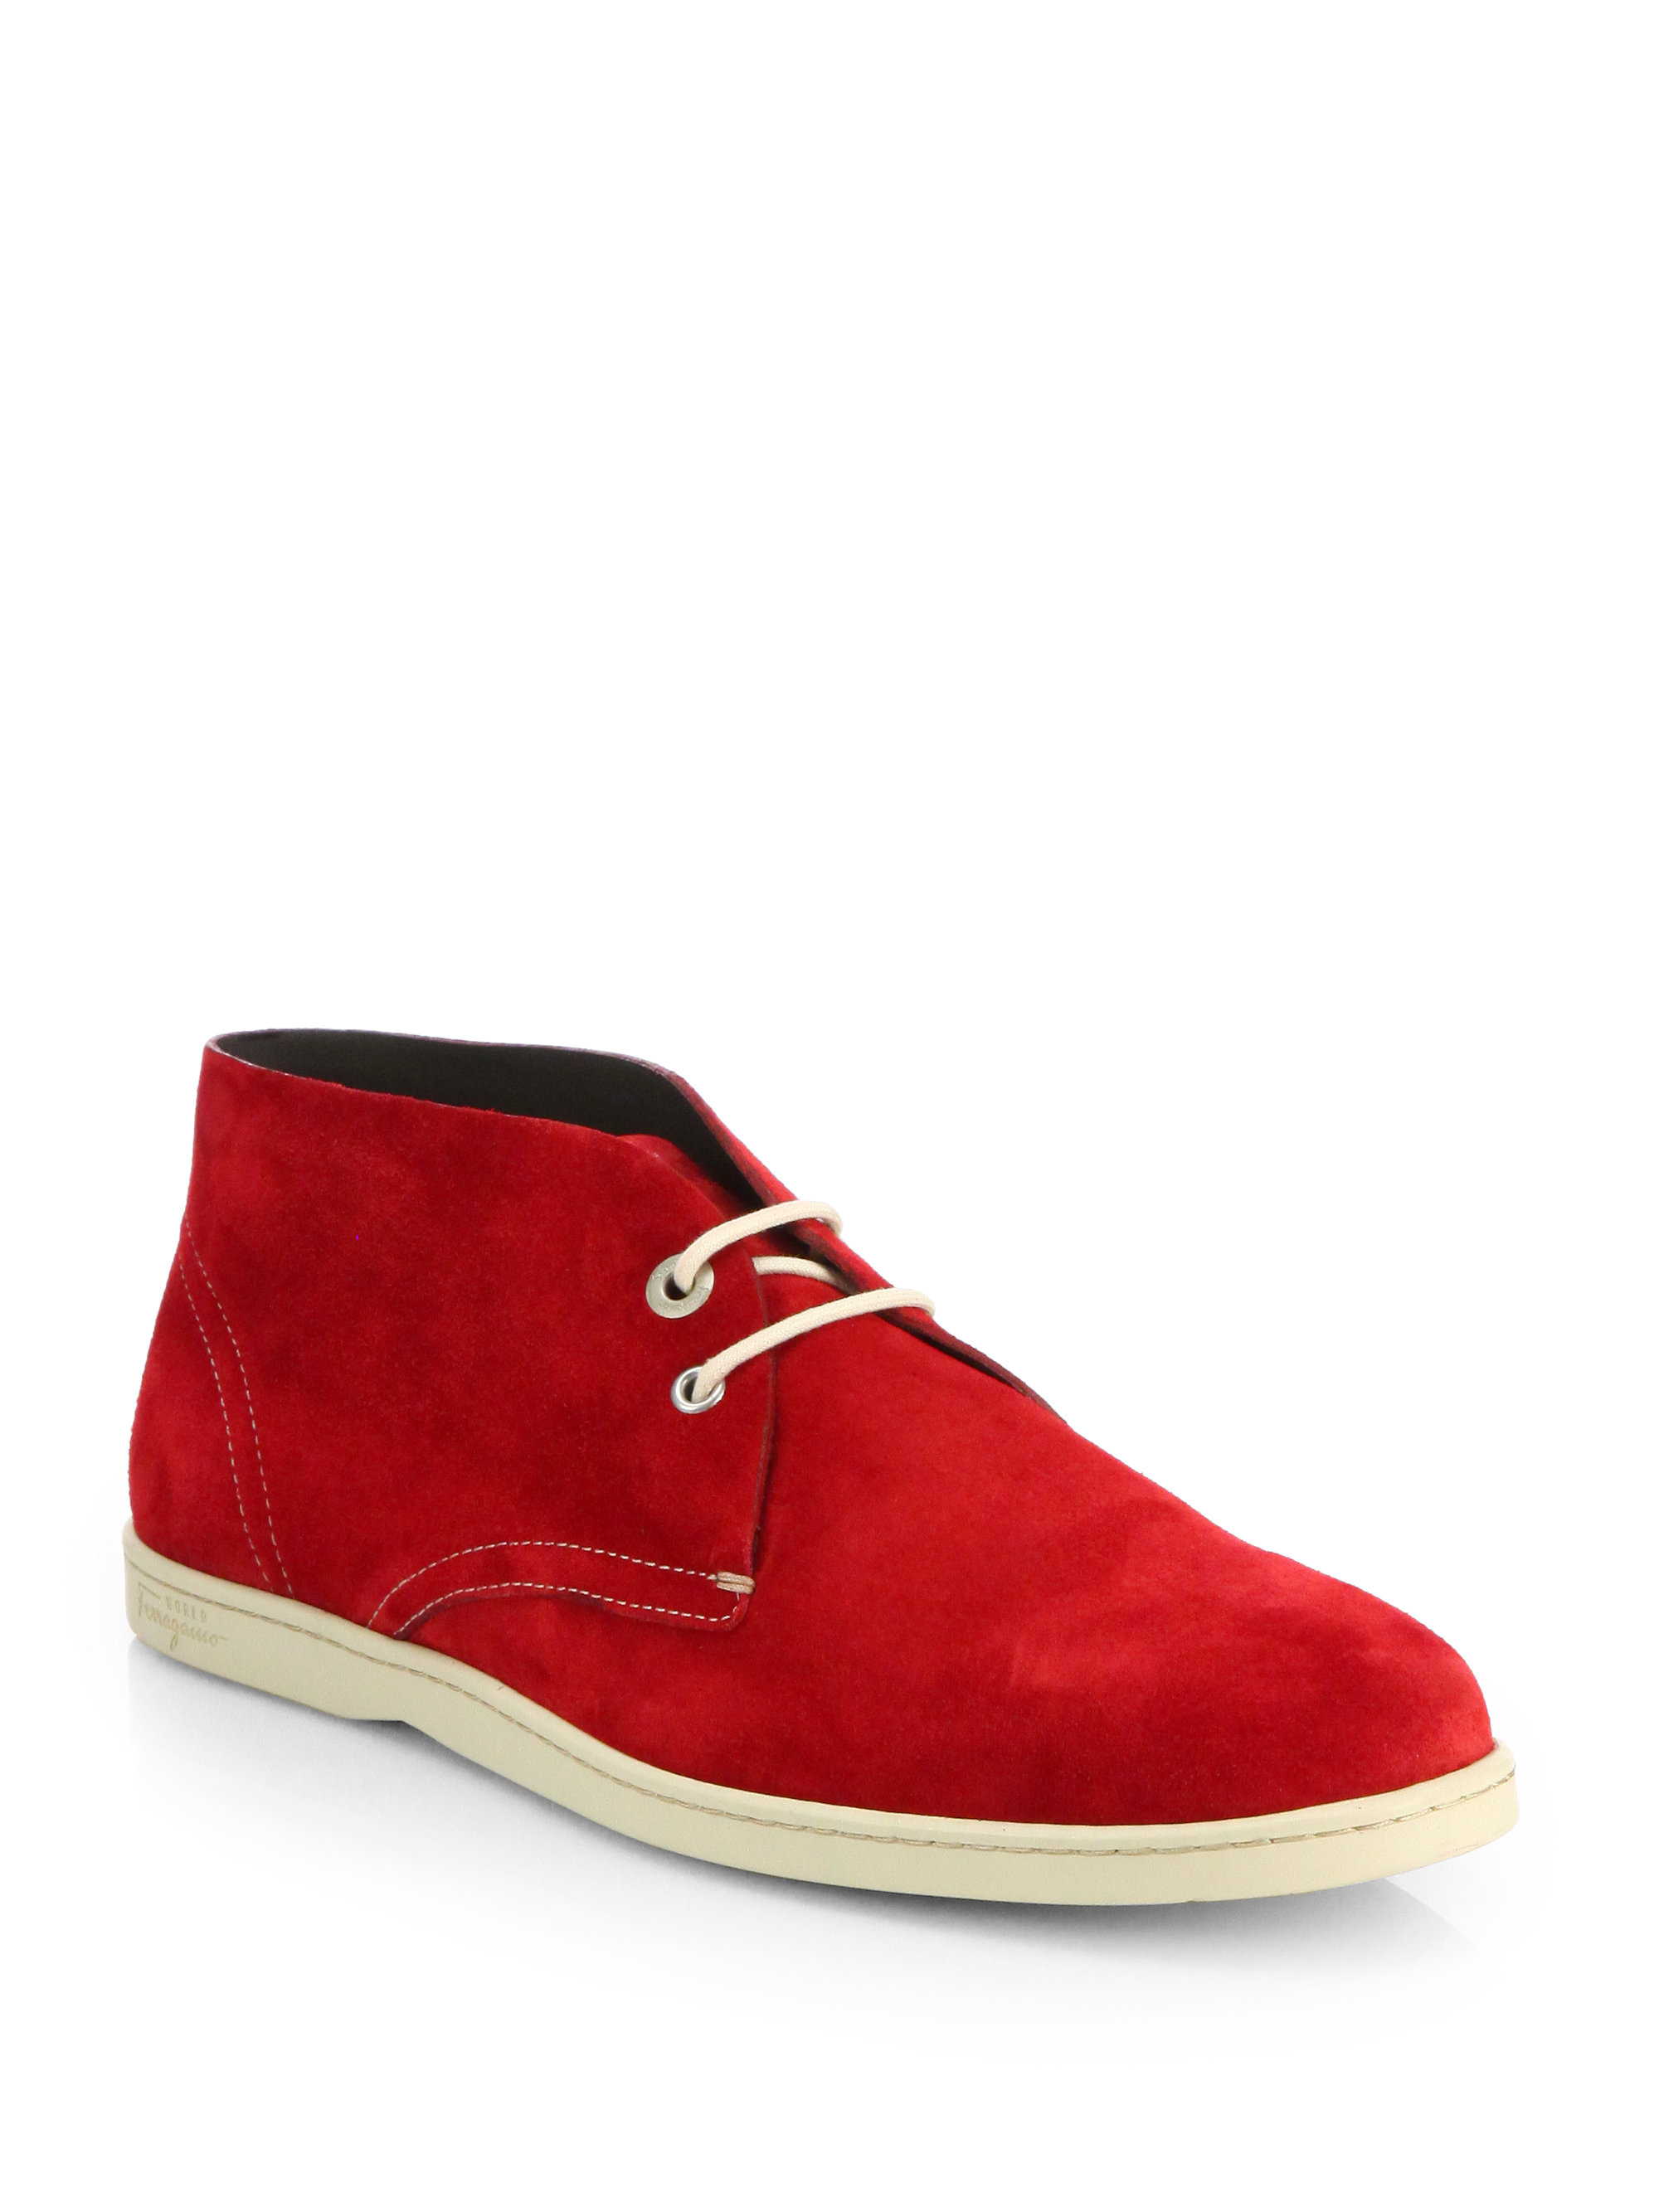 Ferragamo Rico Suede Chukka Boots in Red for Men | Lyst